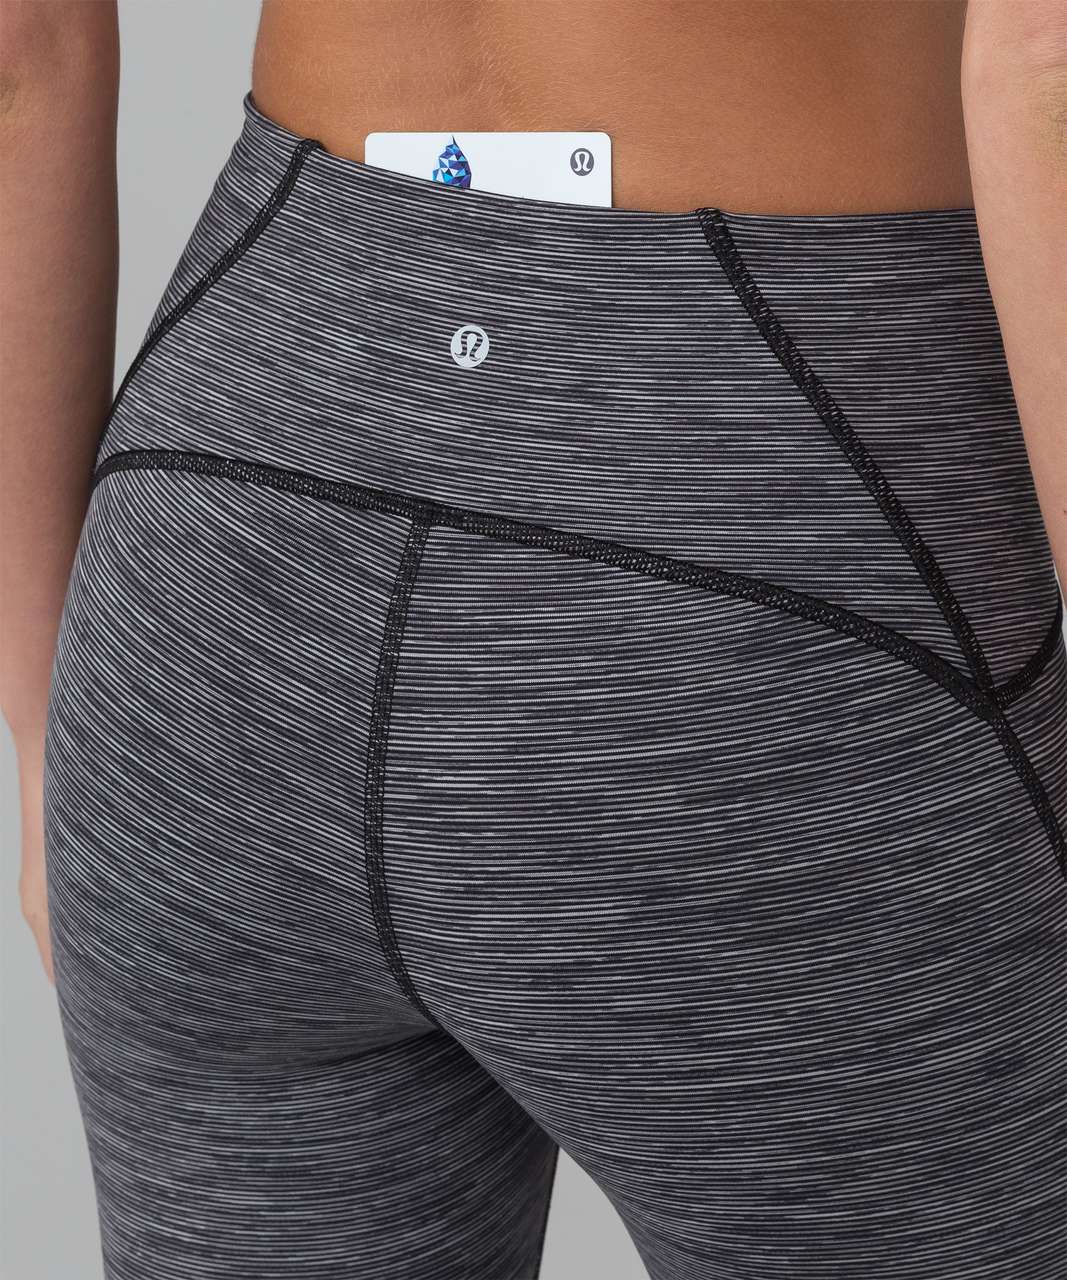 Lululemon Train Times 7/8 Pant (25" ) - Wee Are From Space Black Slate